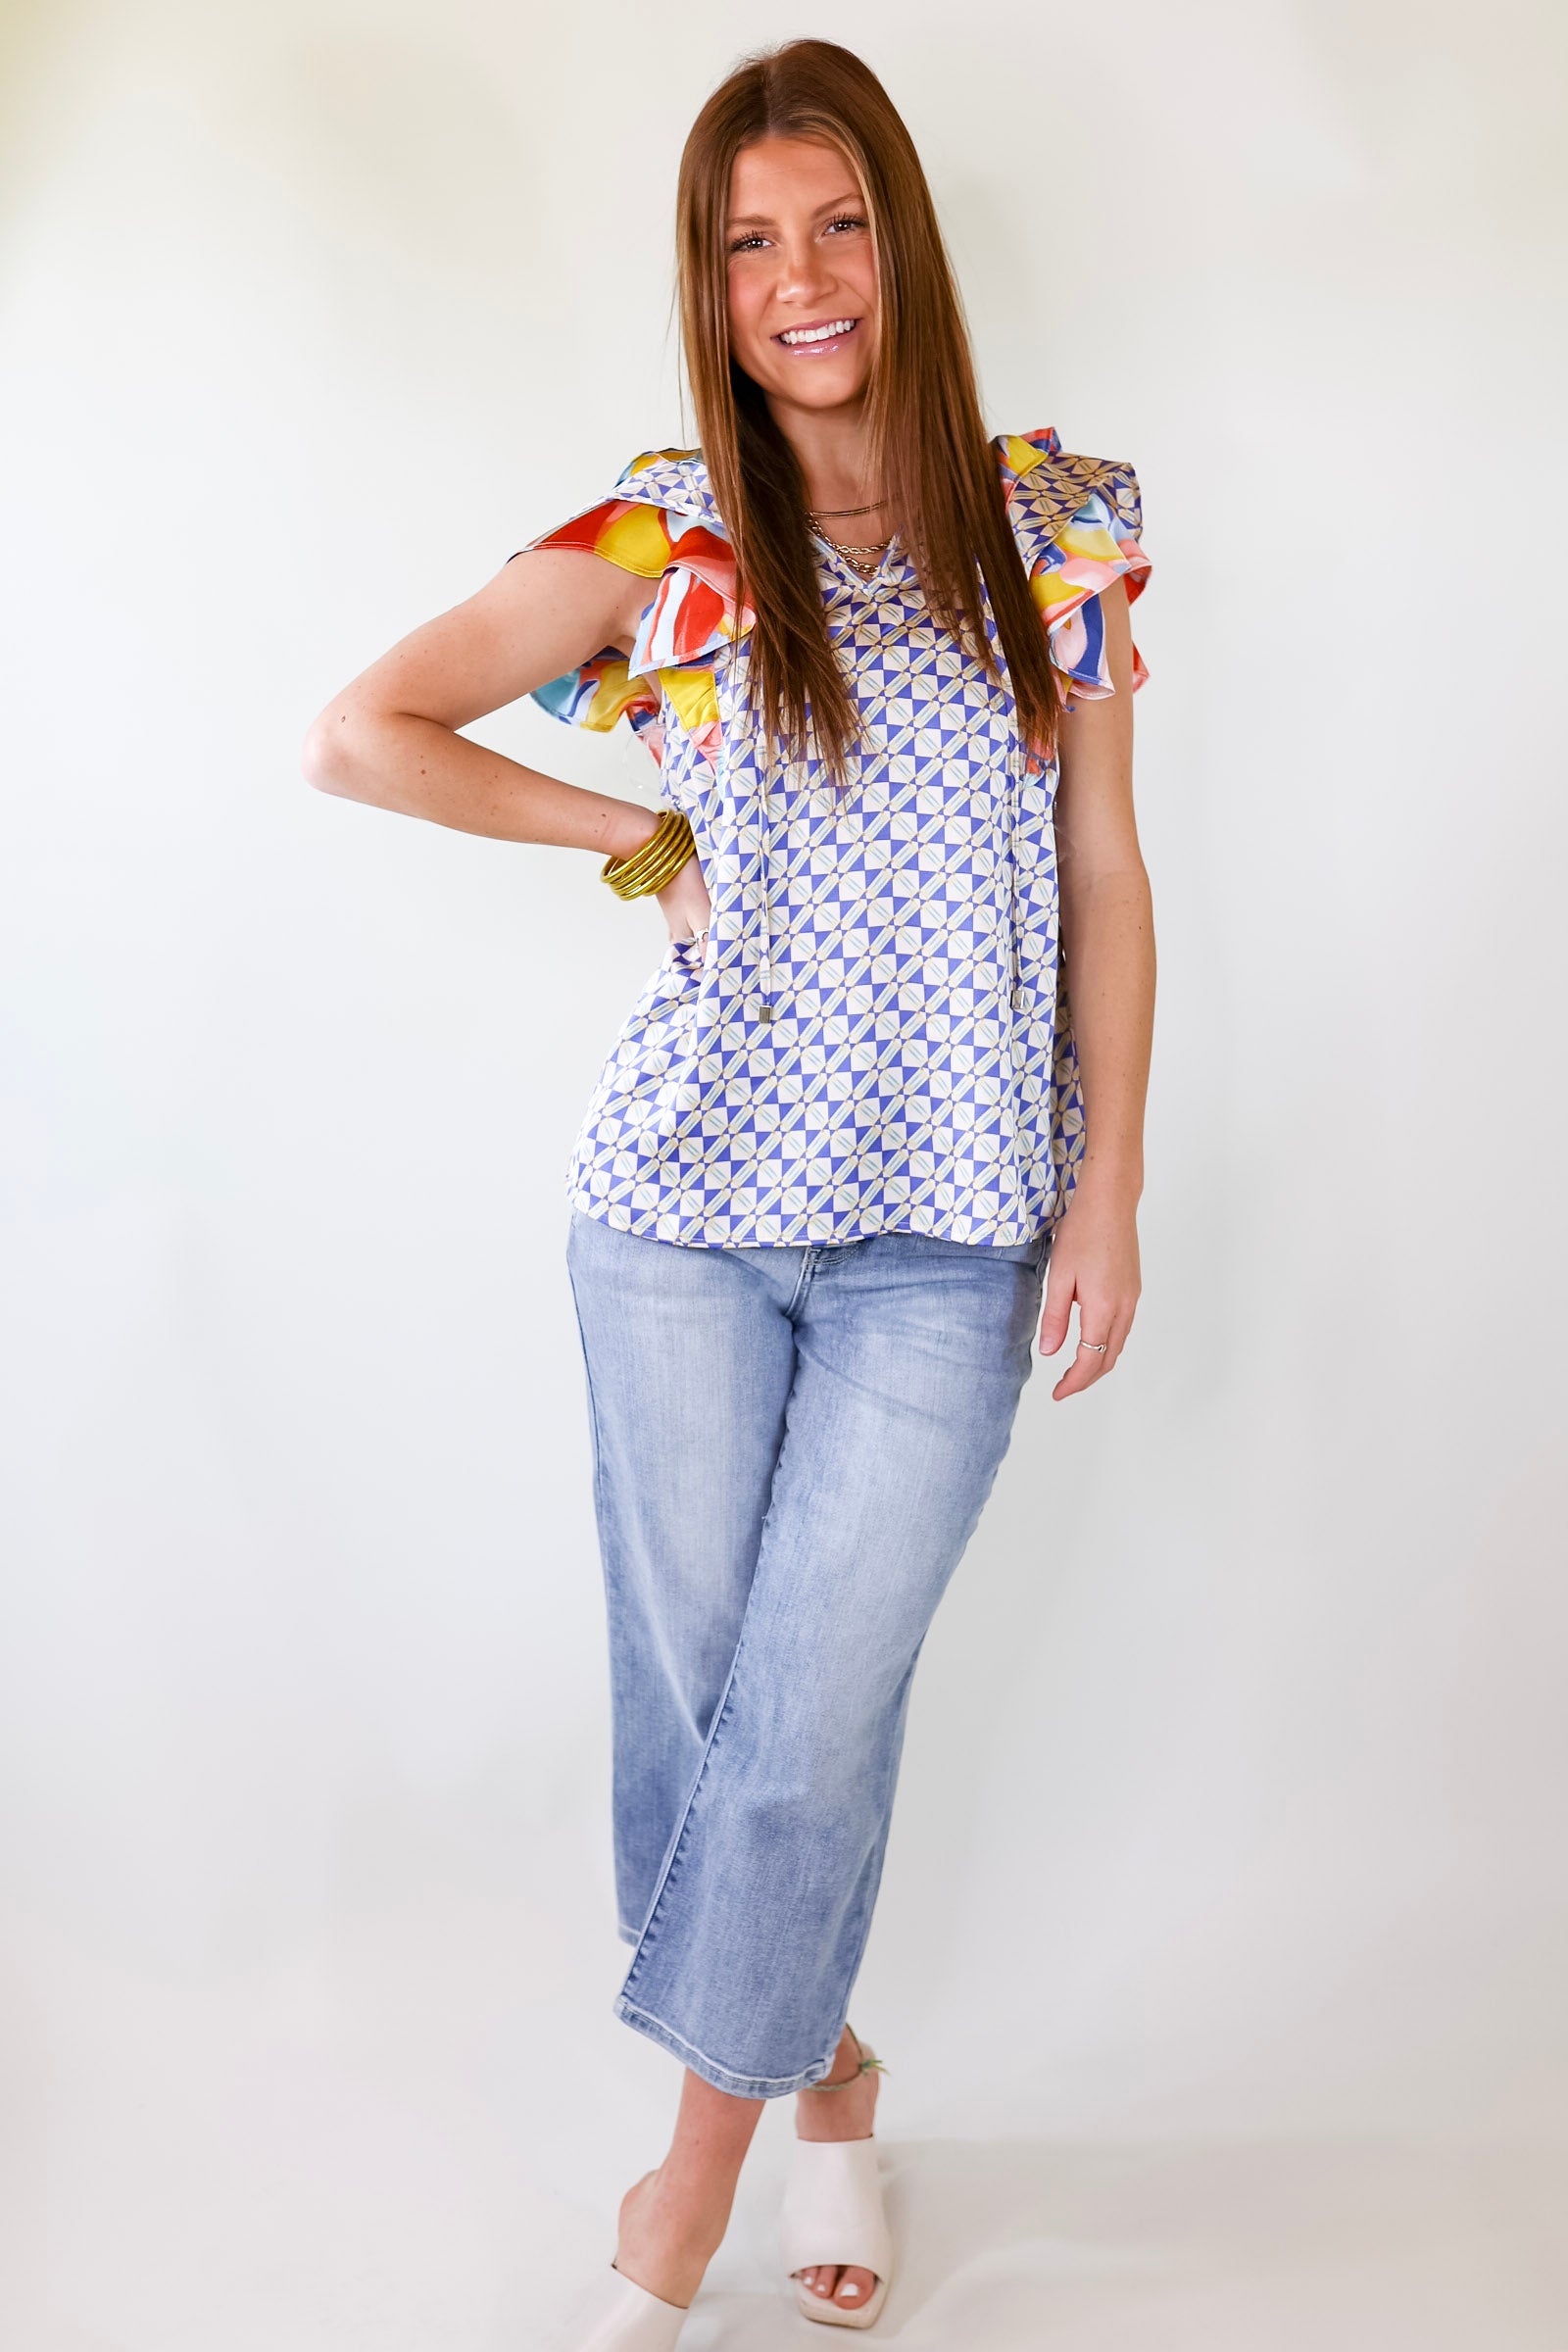 Blissful Expressions Ruffled Capped Sleeves and Tied Keyhole Neck Tee in Beige and Blue - Giddy Up Glamour Boutique